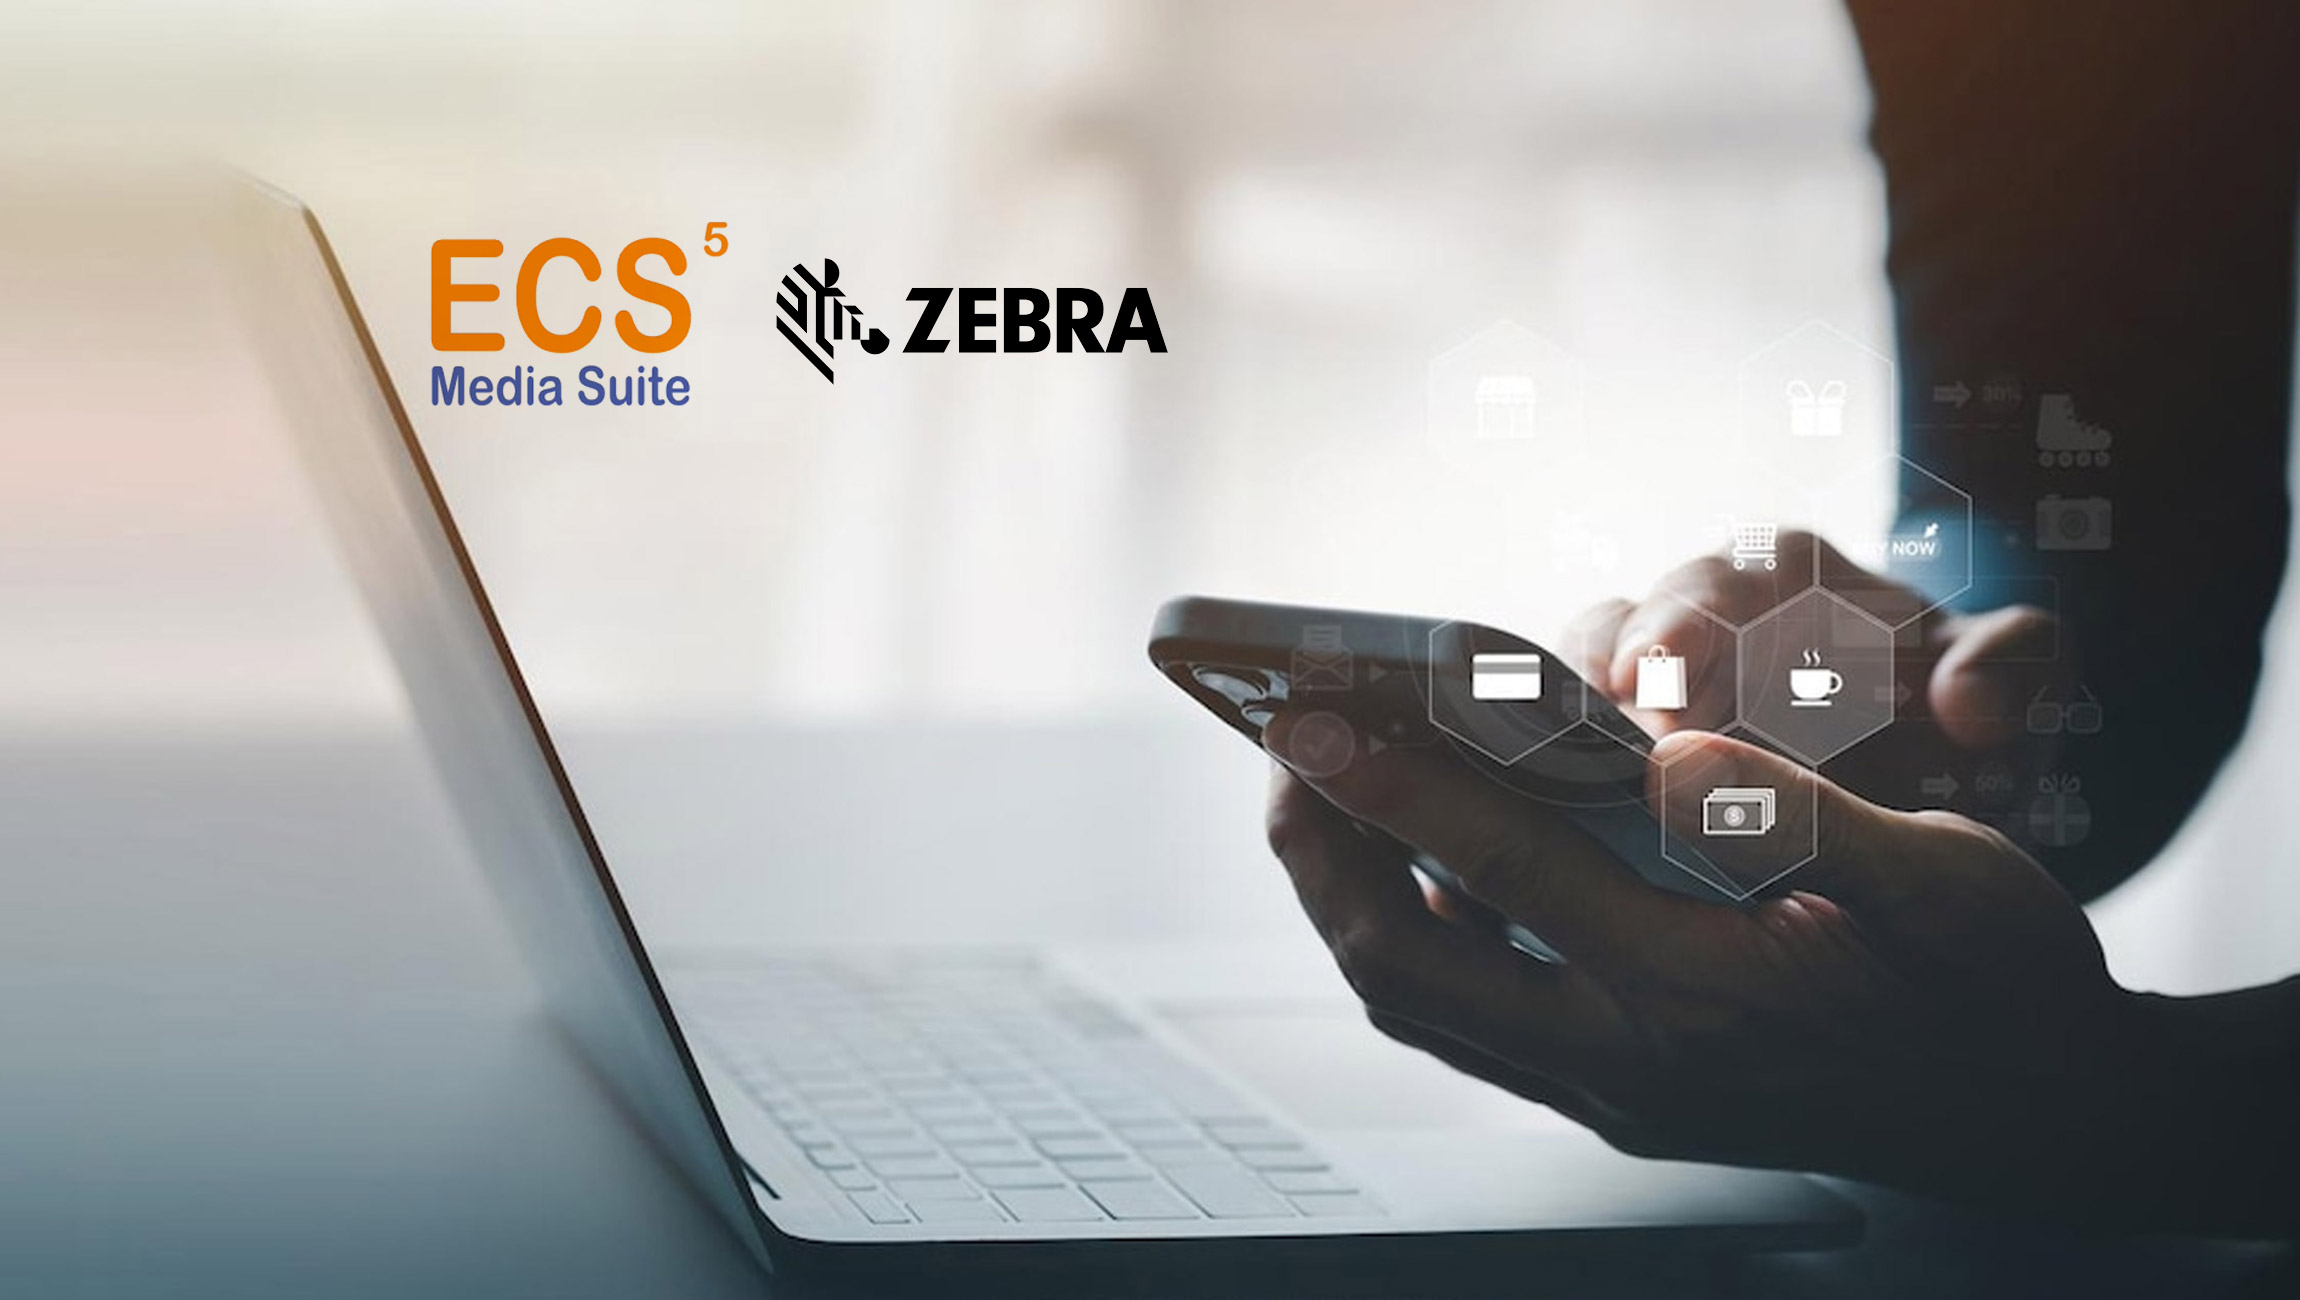 The ECS5 Media Suite from ECS Global Inc. is Fully Compatible with Mobile Devices from Zebra Technologies